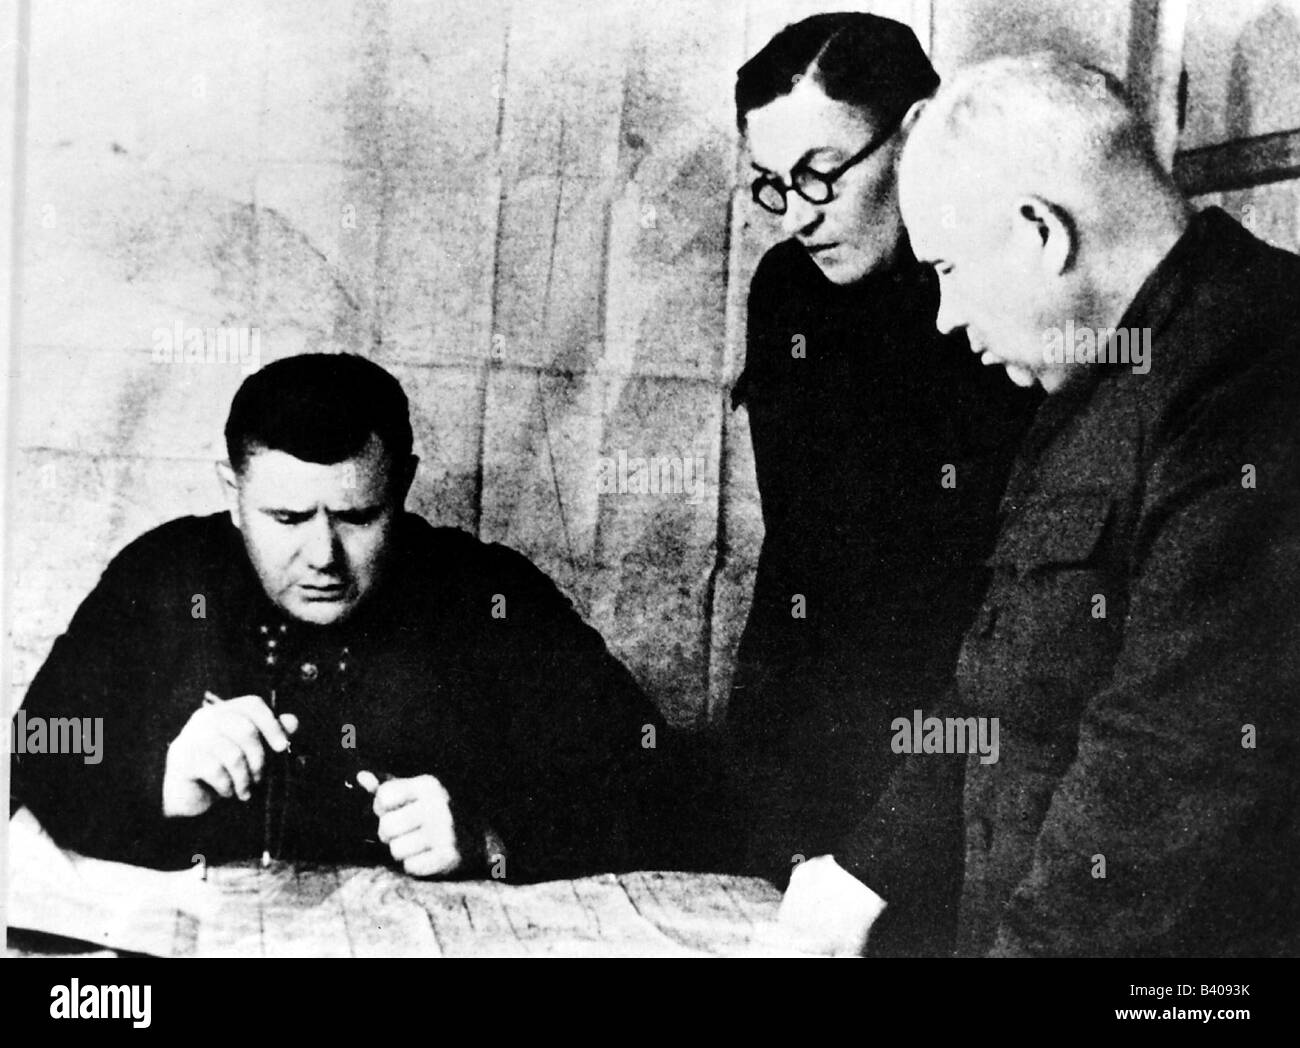 events, Second World War / WW II, Russia, Stalingrad, 20.11.1942 - 2.2.1943, briefing at the headquarters of the Soviet Southern Front, A.J. Yeremenko, A.S. Chuyanov, Nikita Sergeyevich Khrushchev, circa October / November 1942, decision, counter offensive against German Sixth Army, Chrustschow, historic, historical, Andrej Ivanovic Eremenko, Tshuyanov, Chruscev, Red Army, Soviet Union, USSR, map, maps, 20th century, people, 1940s, Stock Photo